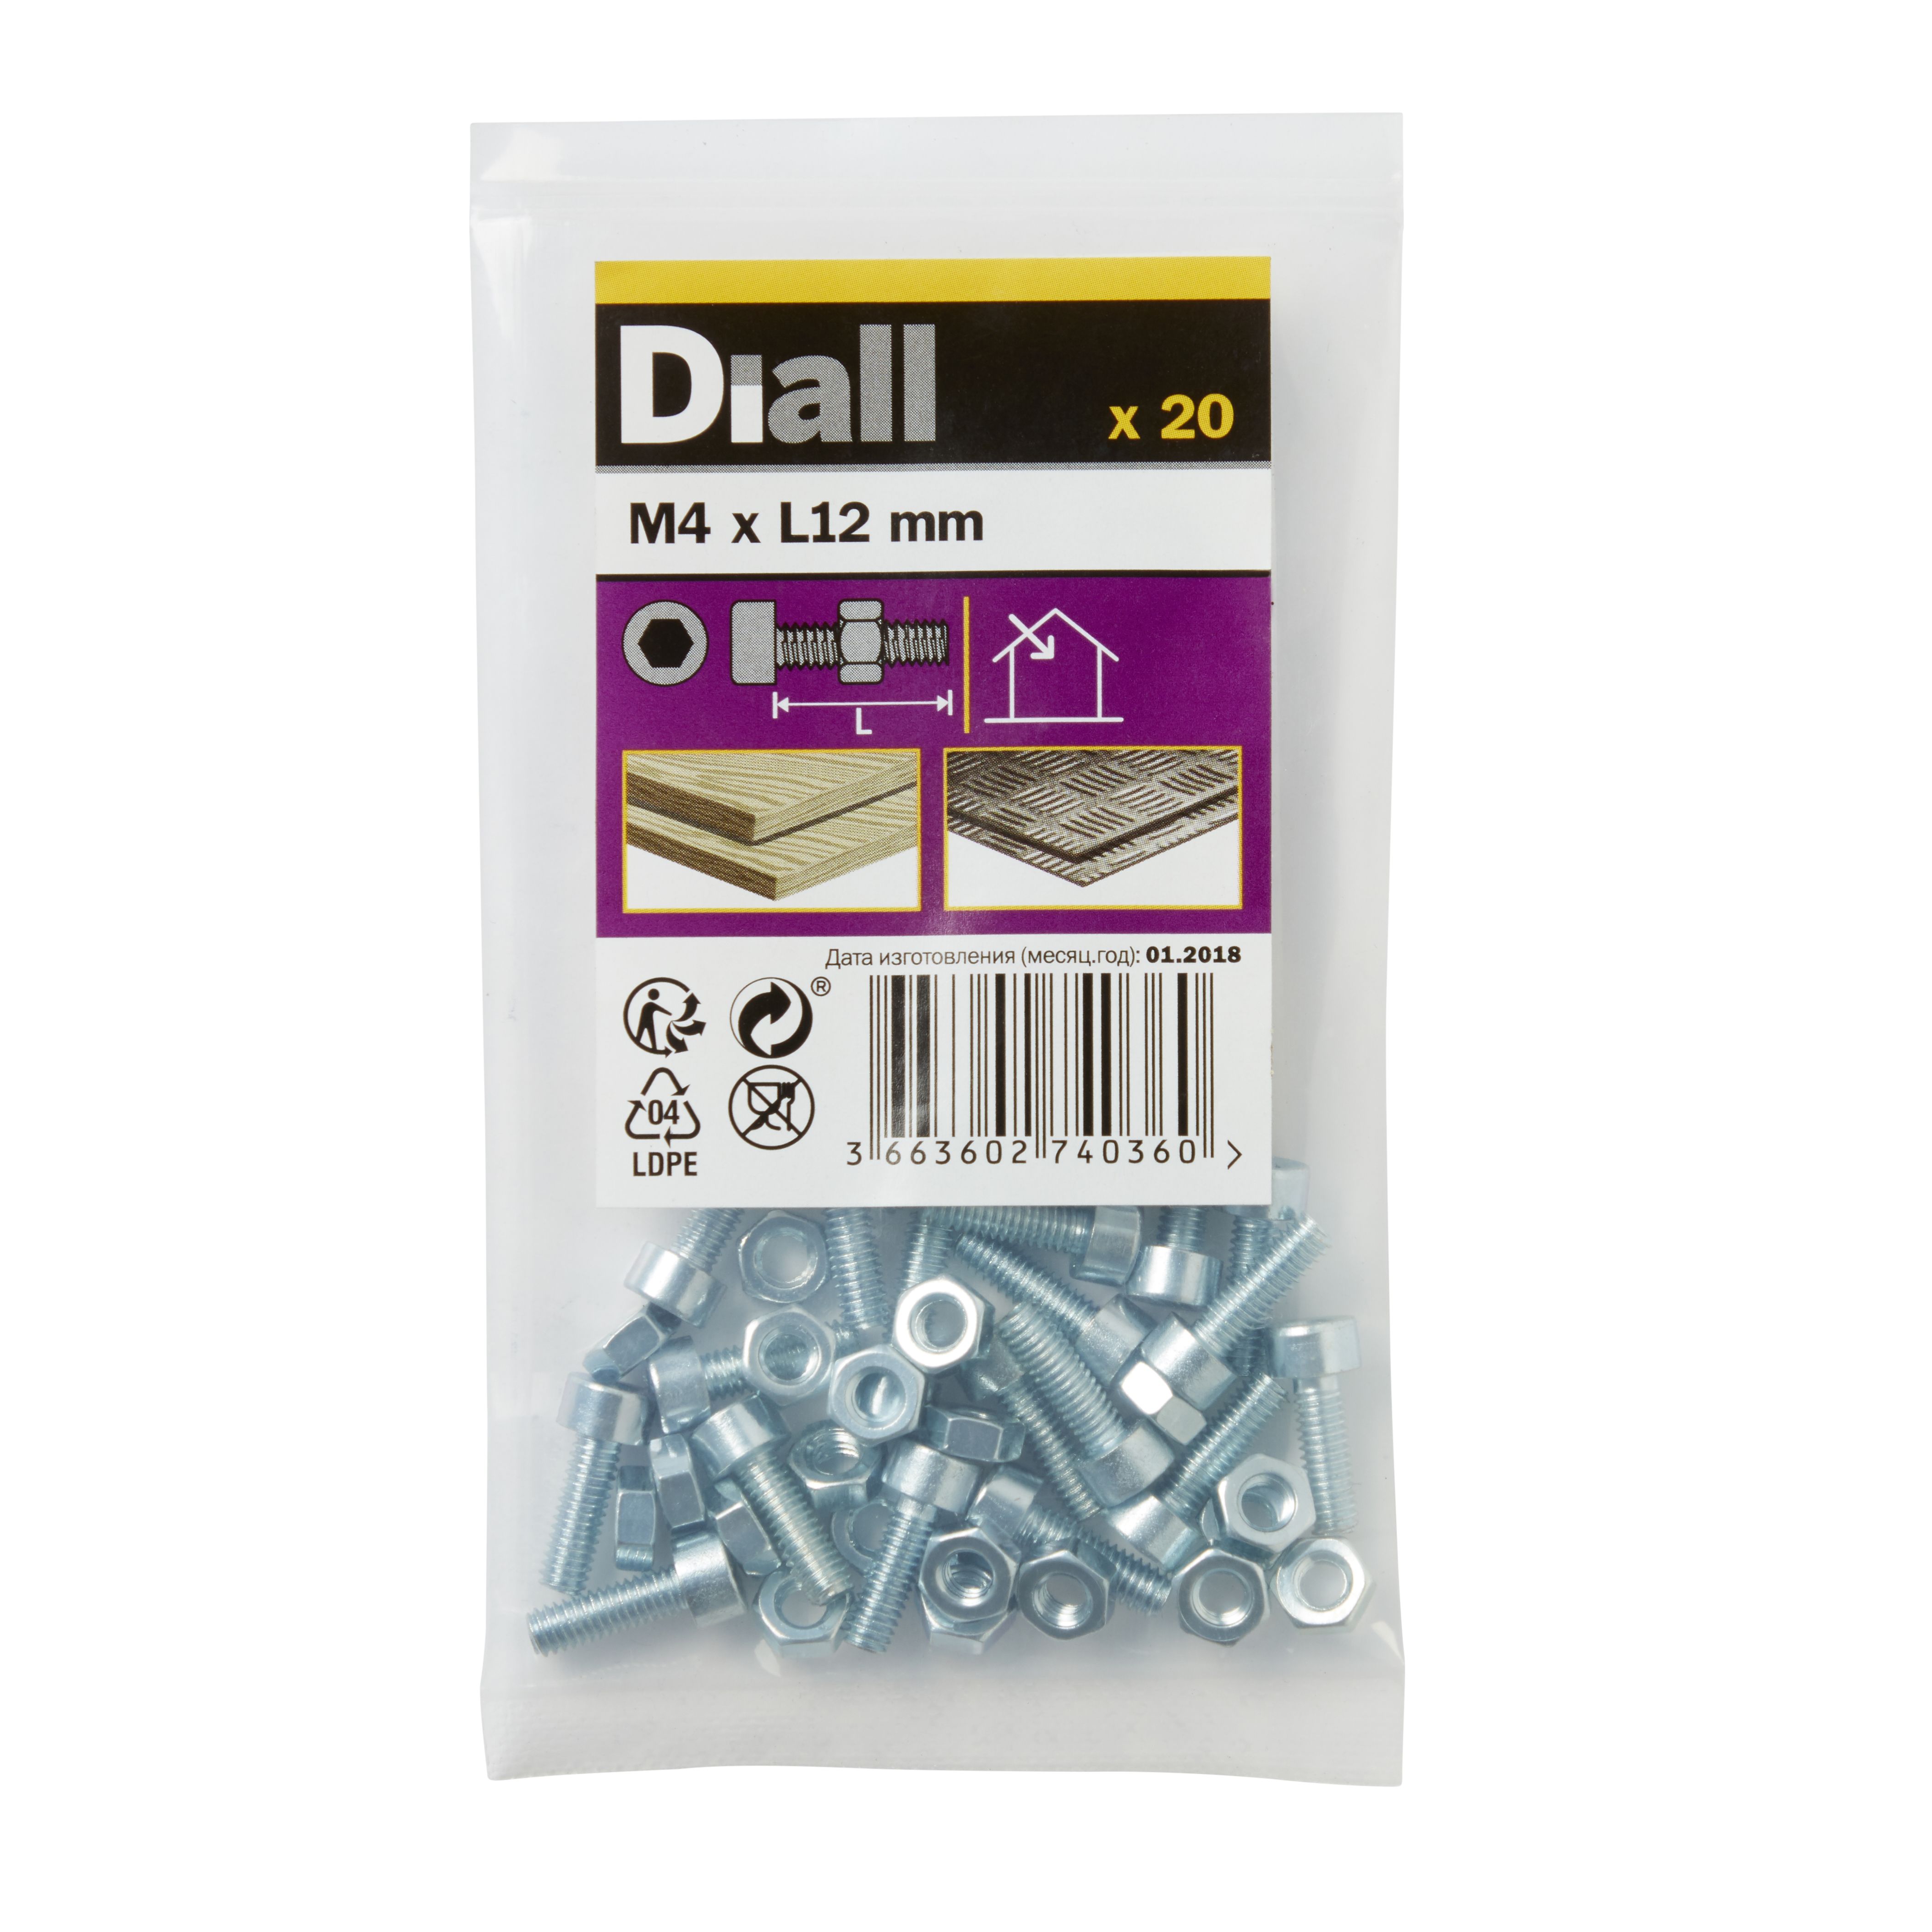 Diall M4 Cylindrical Zinc-plated Carbon steel Set screw & nut (Dia)4mm (L)12mm, Pack of 20